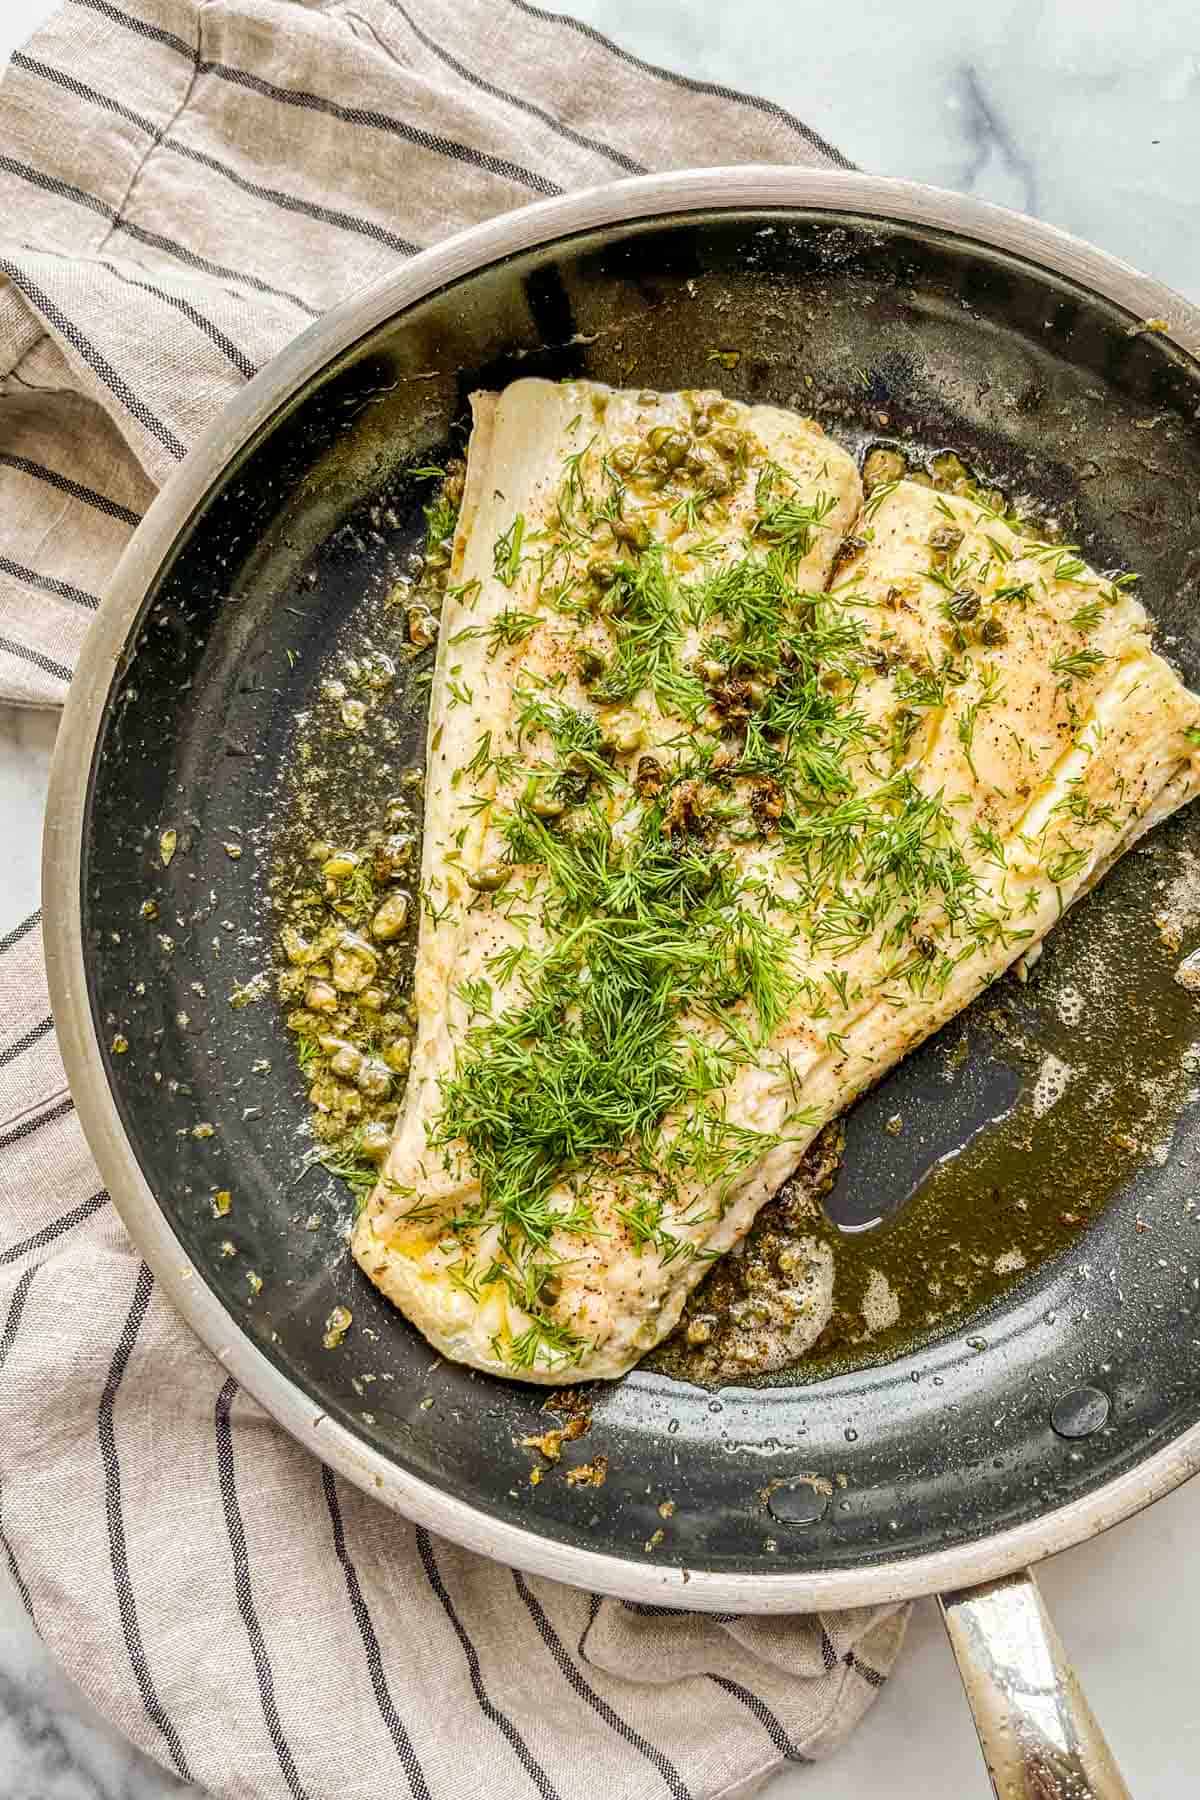 Pan seared halibut in a nonstick skillet.